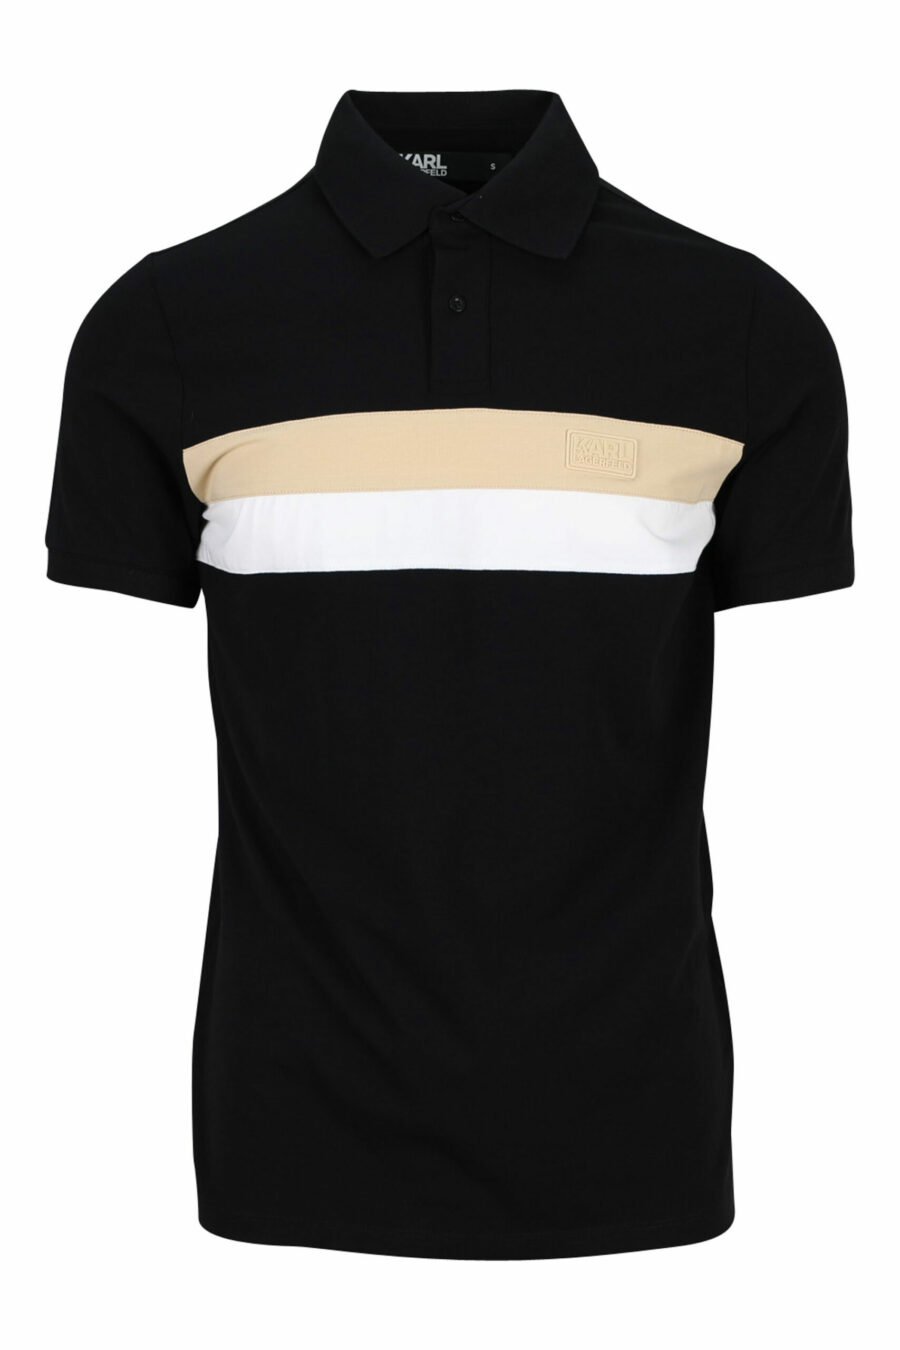 Black polo shirt with beige and white stripe - 4062226399197 scaled